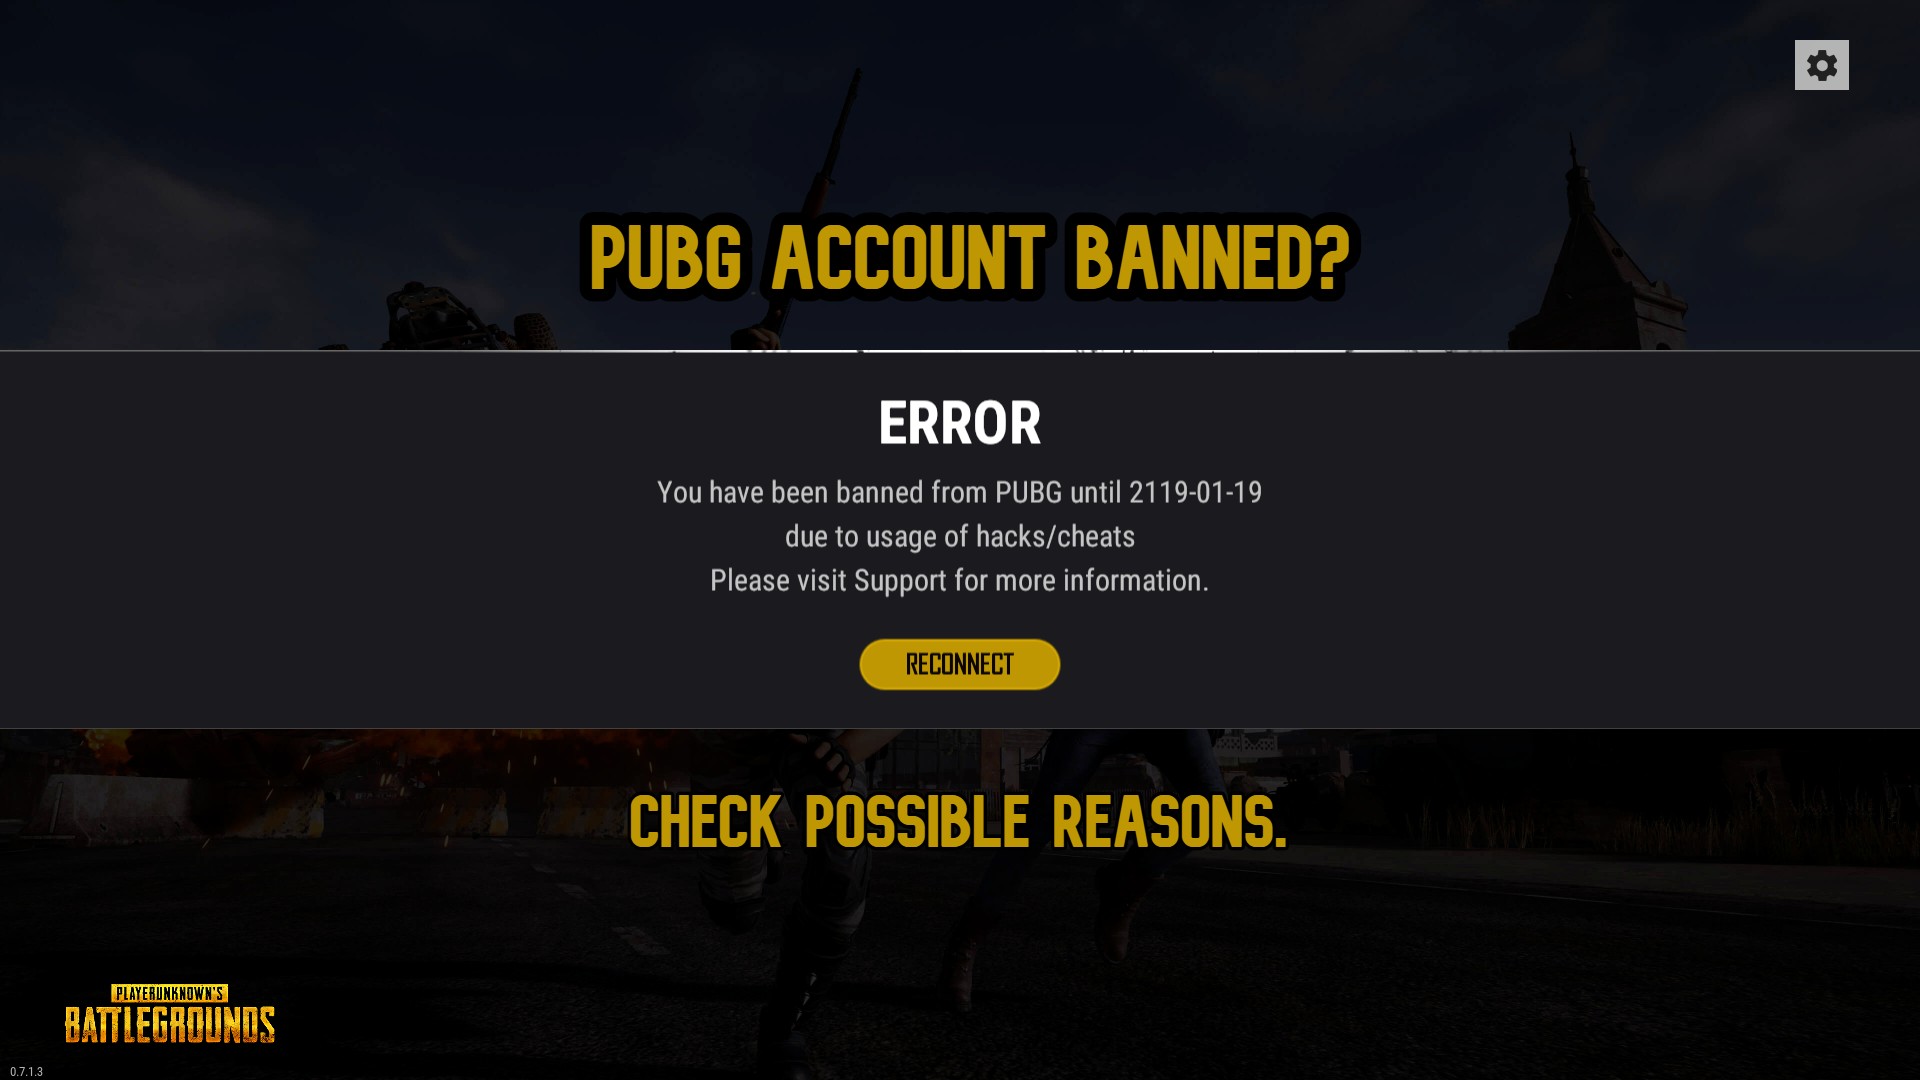 Pubg Account Banned? Check Here Possible Reasons.